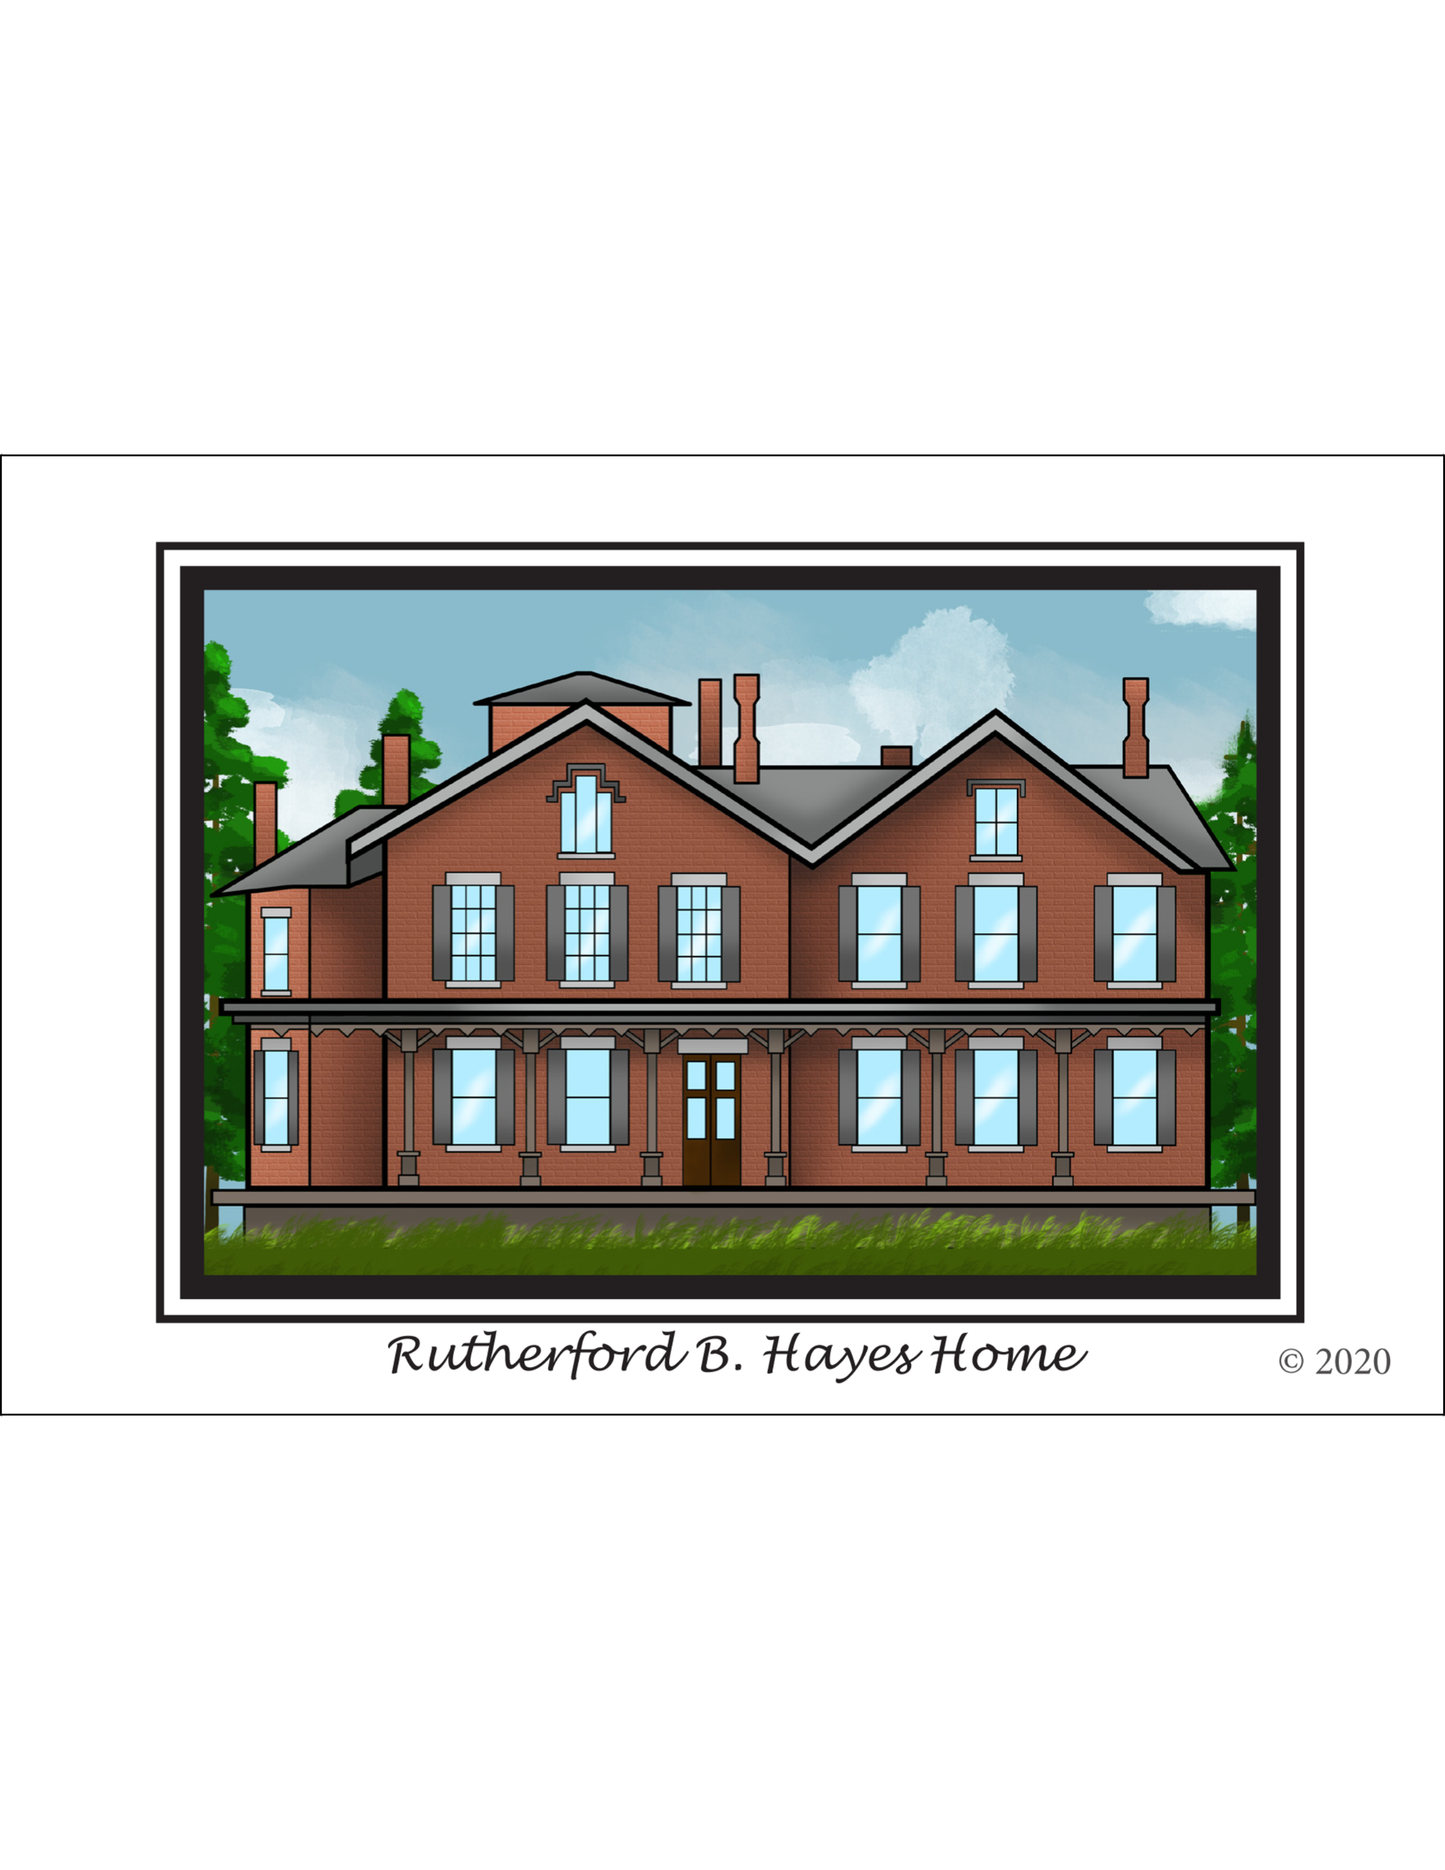 Hoy's Toys United We Stand Ohio Presidential Series Post Cards - Rutherford B. Hayes Home